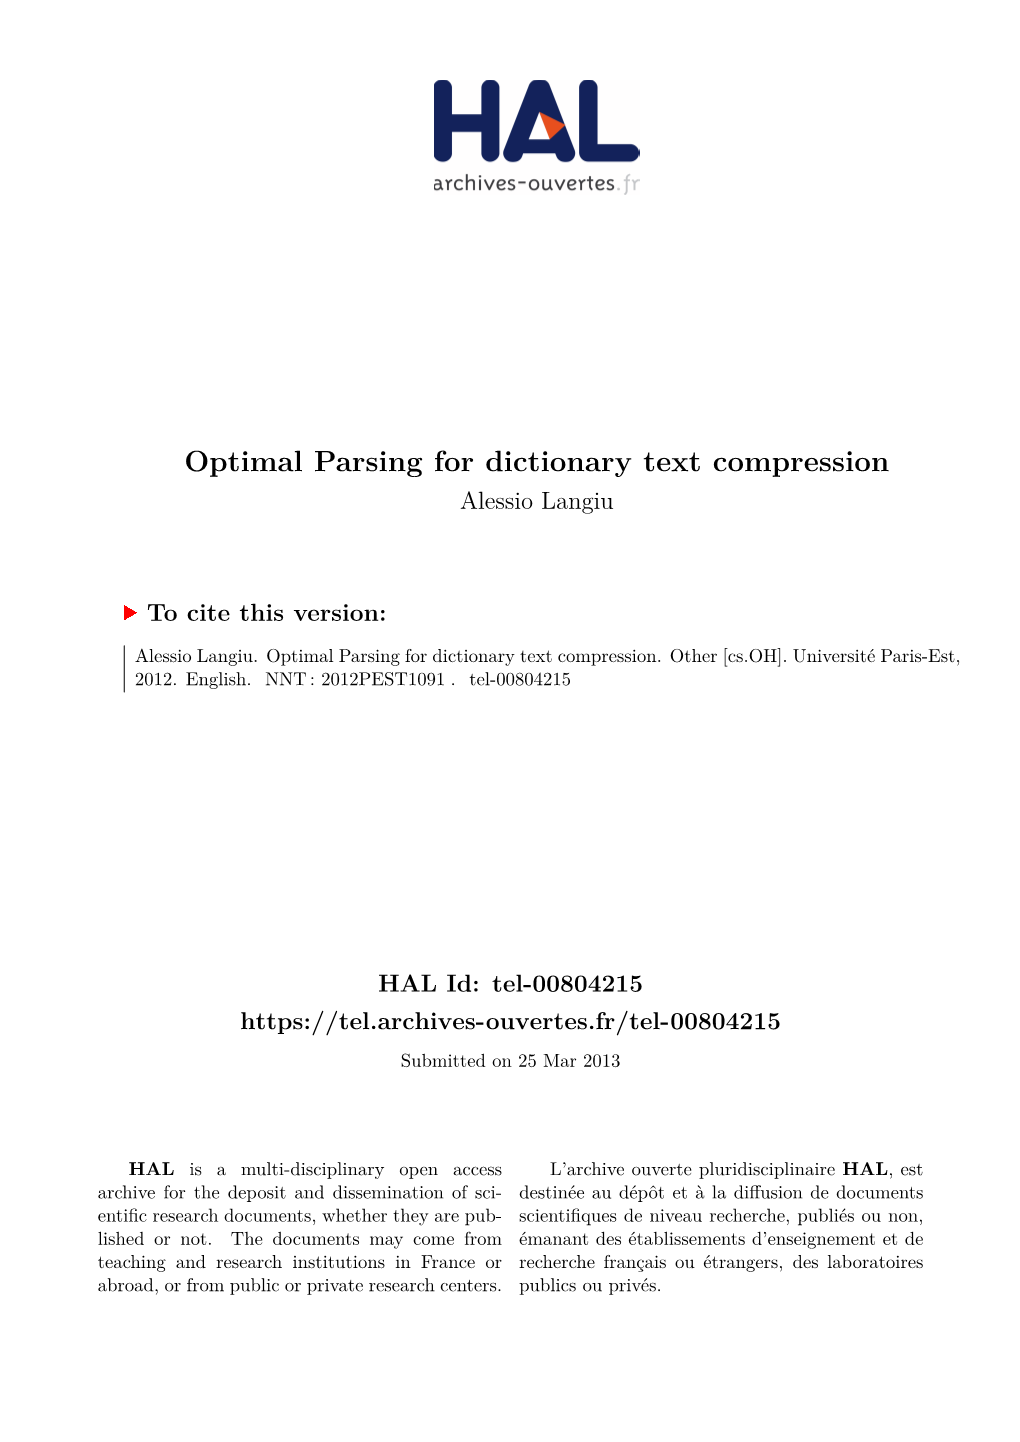 Optimal Parsing for Dictionary Text Compression Alessio Langiu